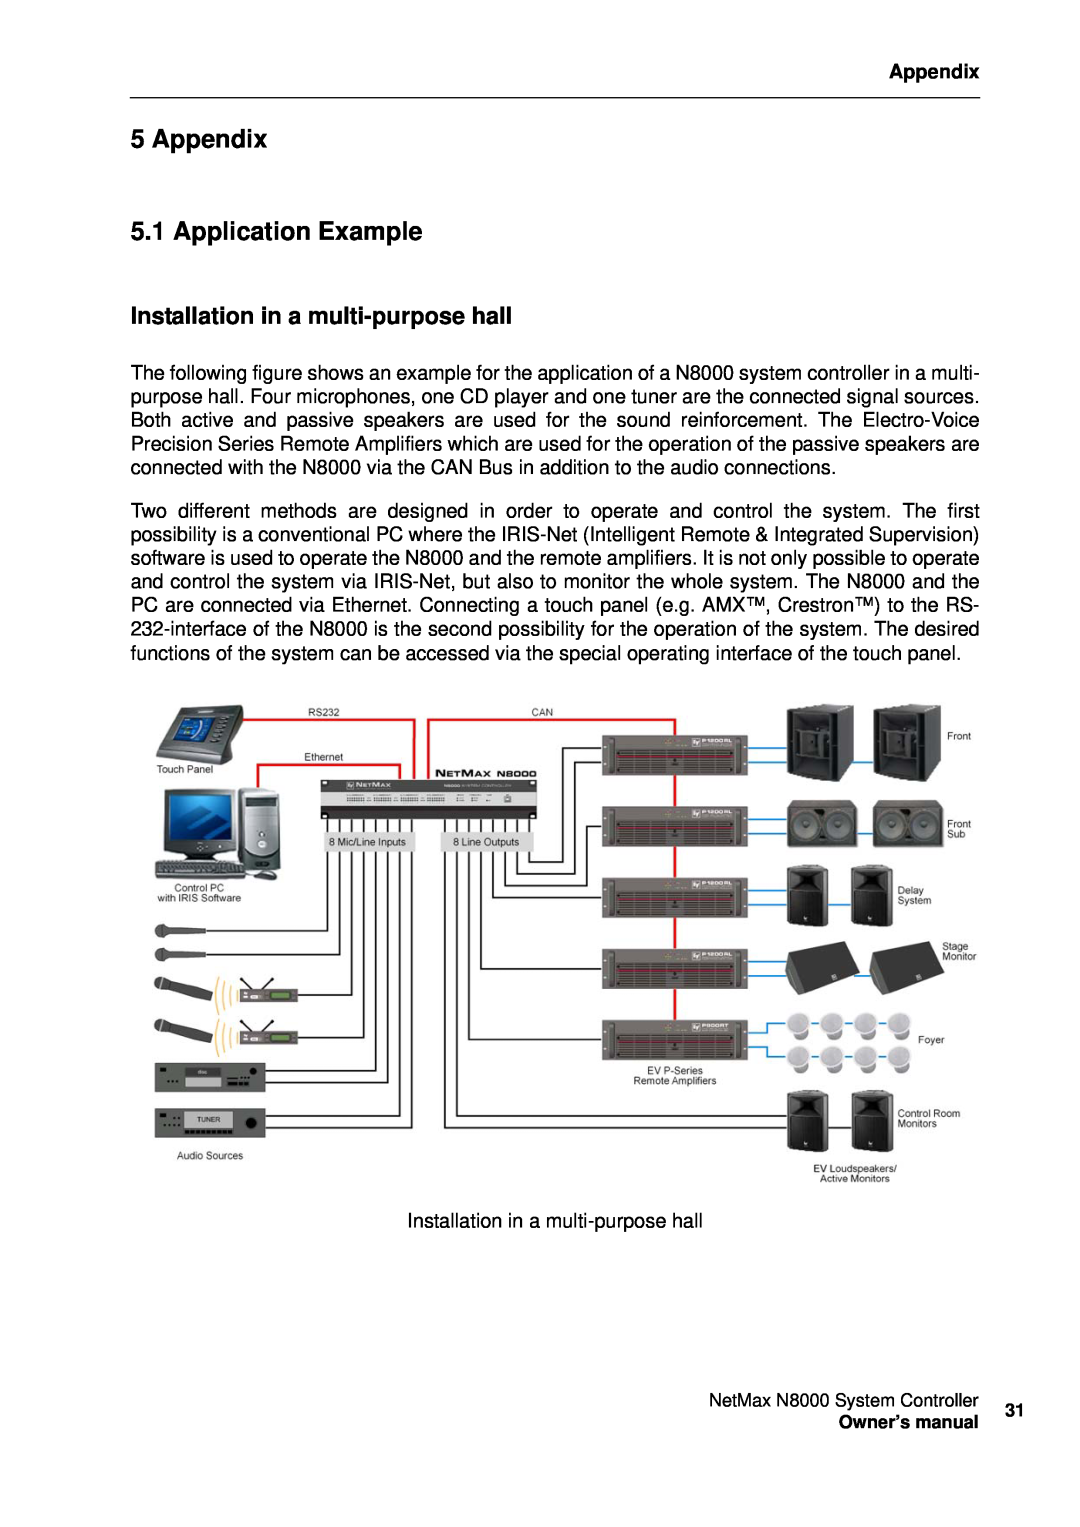 Electro-Voice NetMax N8000 owner manual Appendix 5.1 Application Example, Installation in a multi-purposehall 